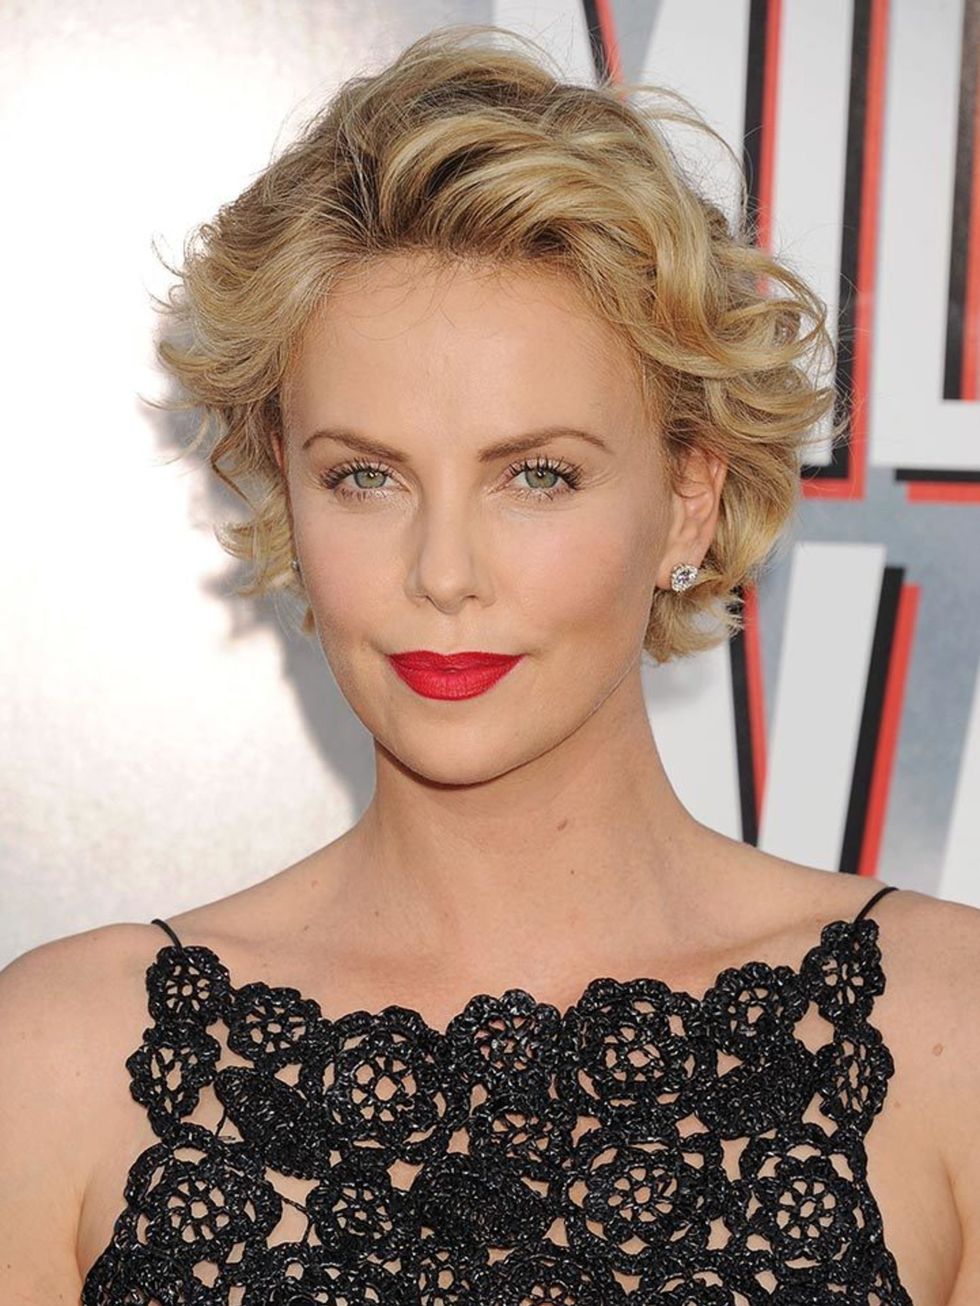 <p><a href="http://www.elleuk.com/fashion/celebrity-style/charlize-theron">Charlize Theron</a></p>